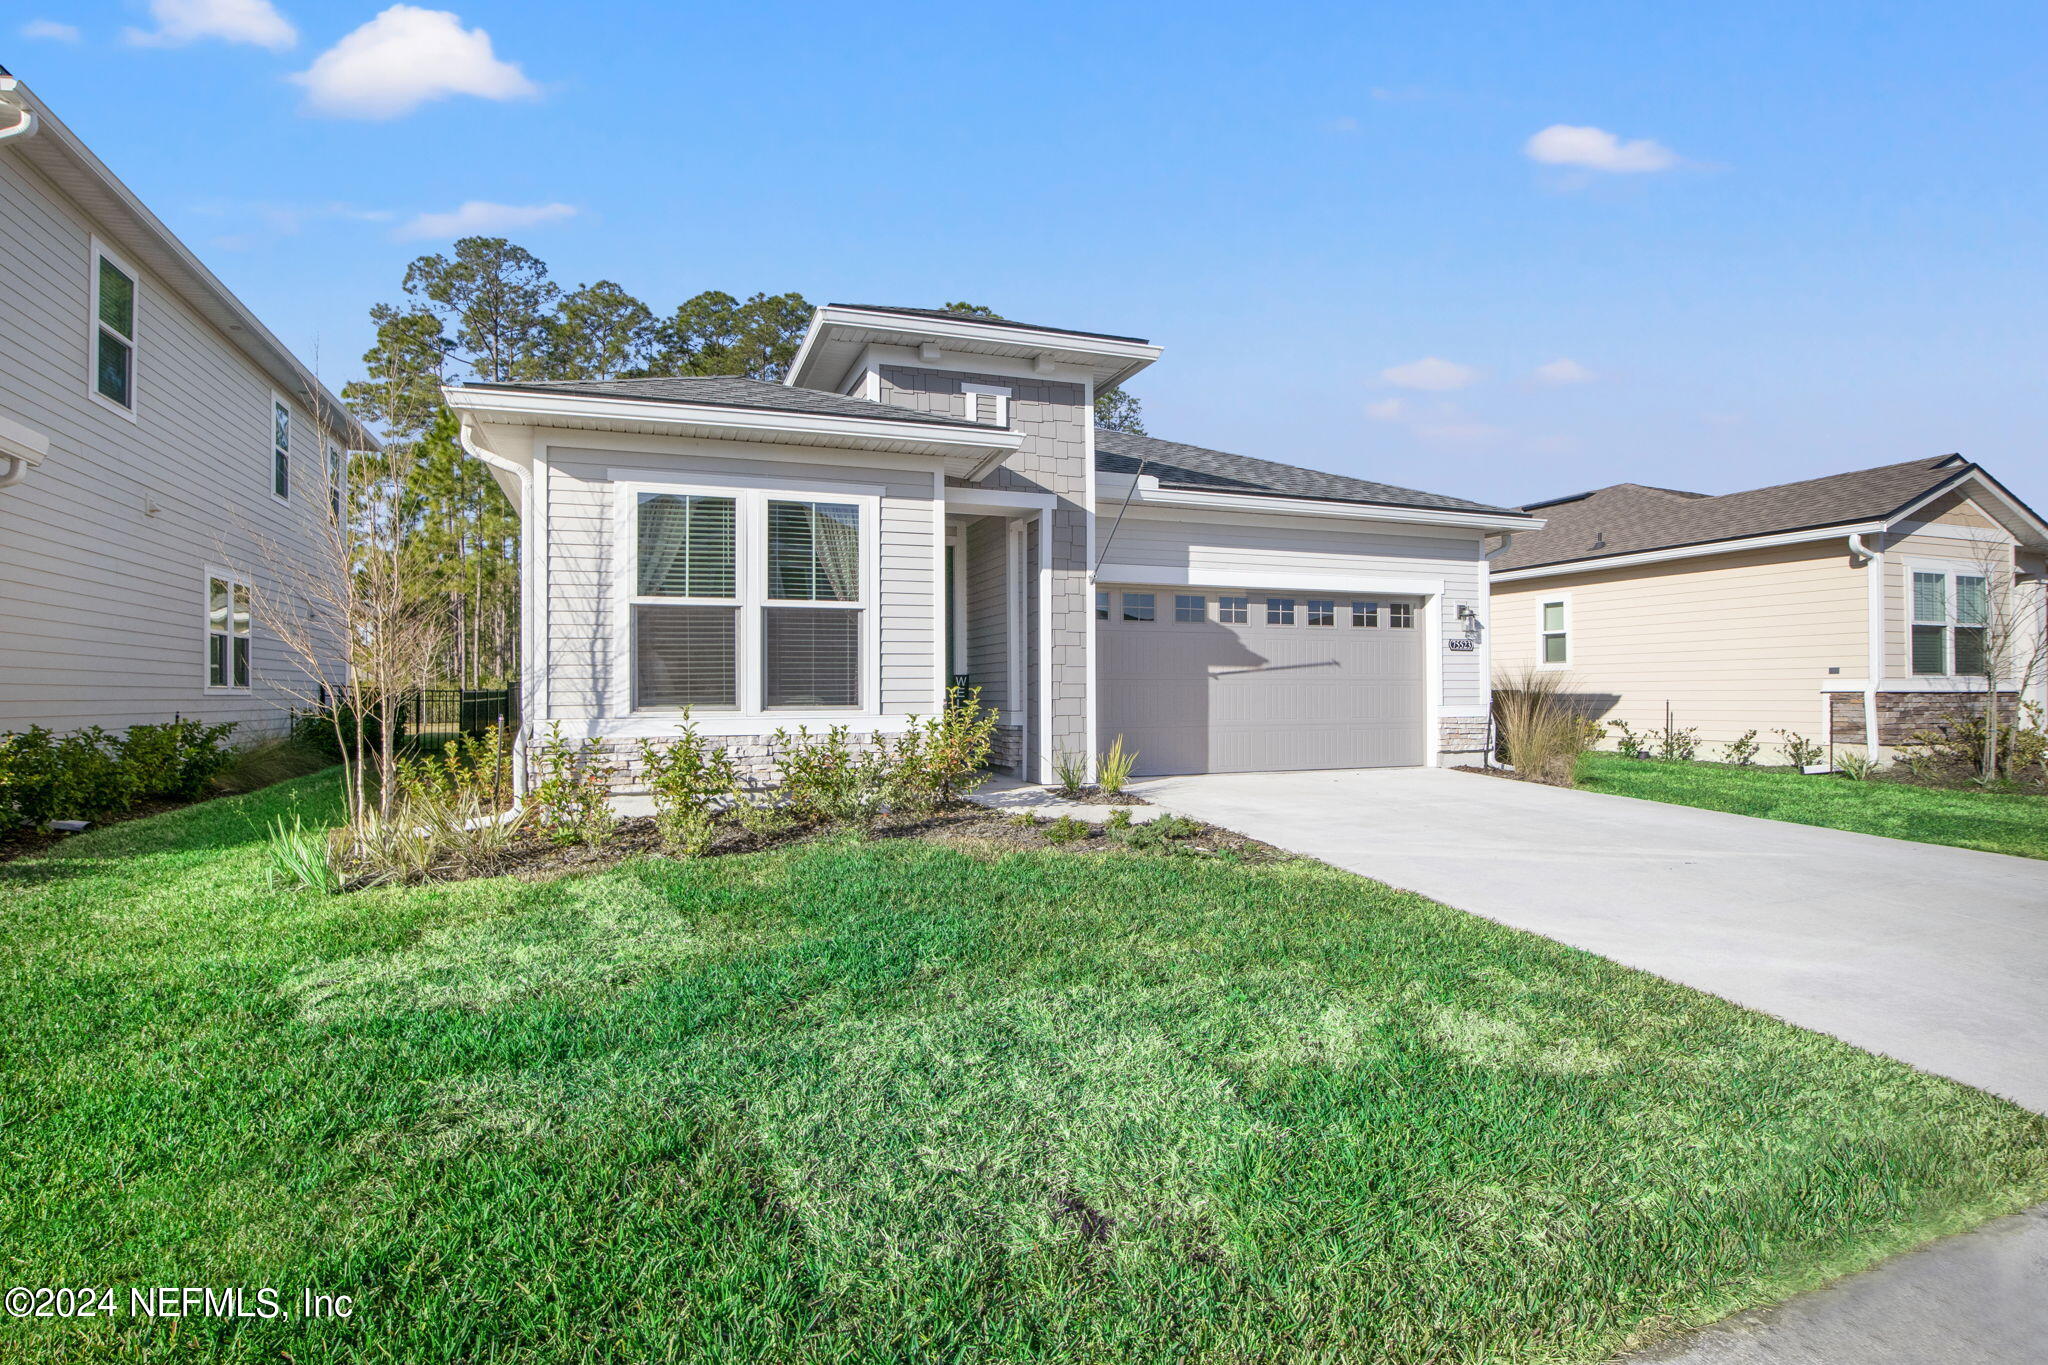 Yulee, FL home for sale located at 75523 CLOVERWOOD Court, Yulee, FL 32097